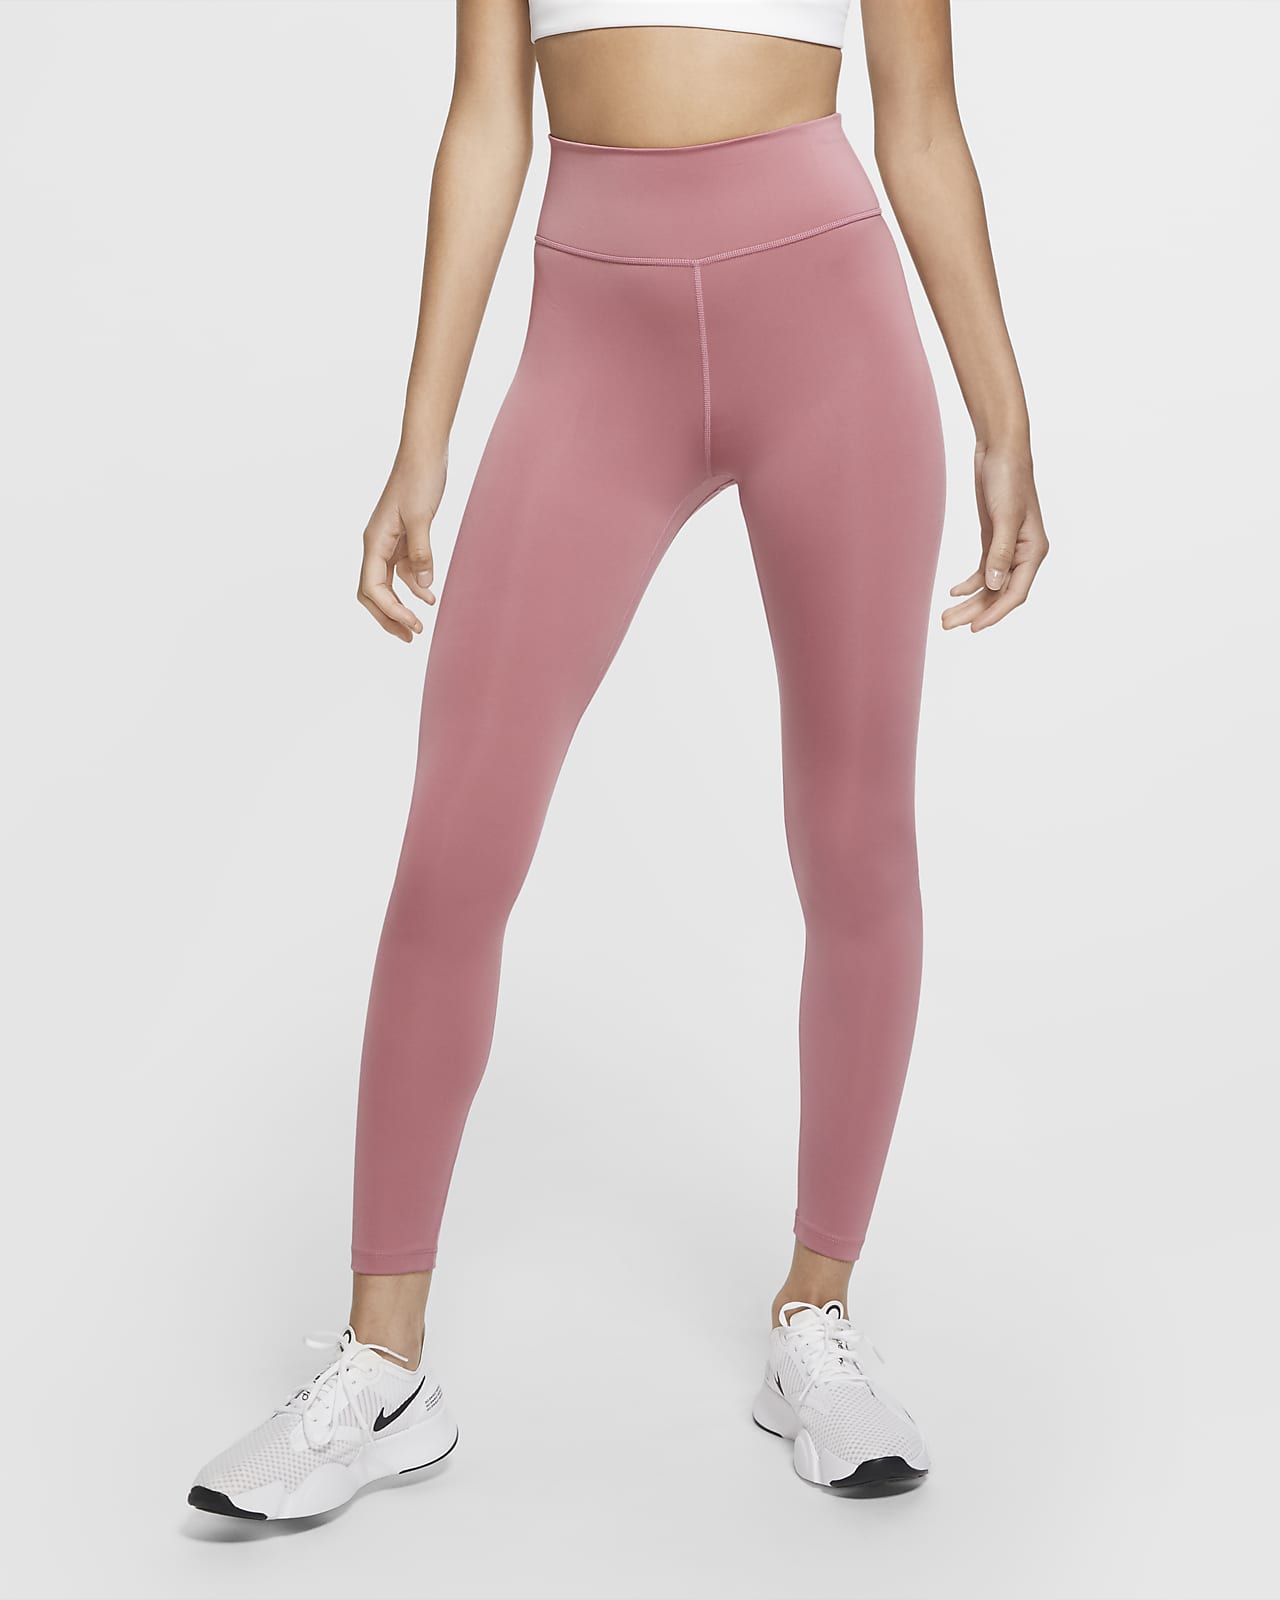 Nike One Tights Pink Top Sellers, SAVE 